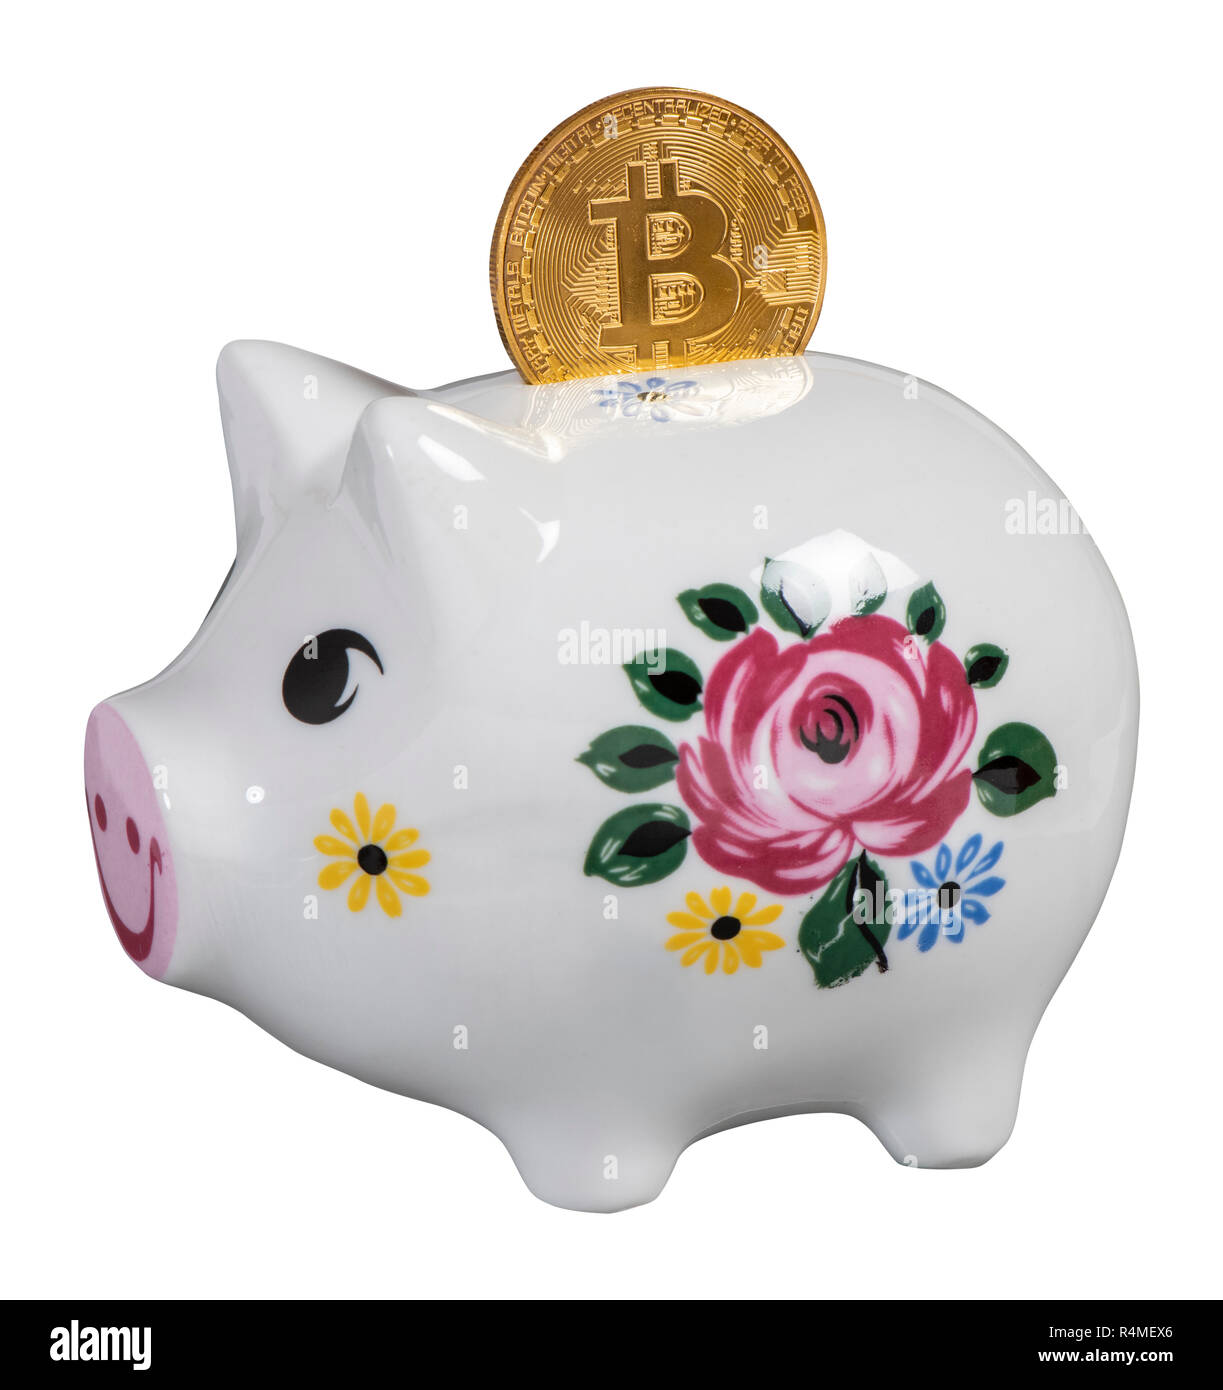 cryptocurrency bitcoin laying on piggy bank Stock Photo